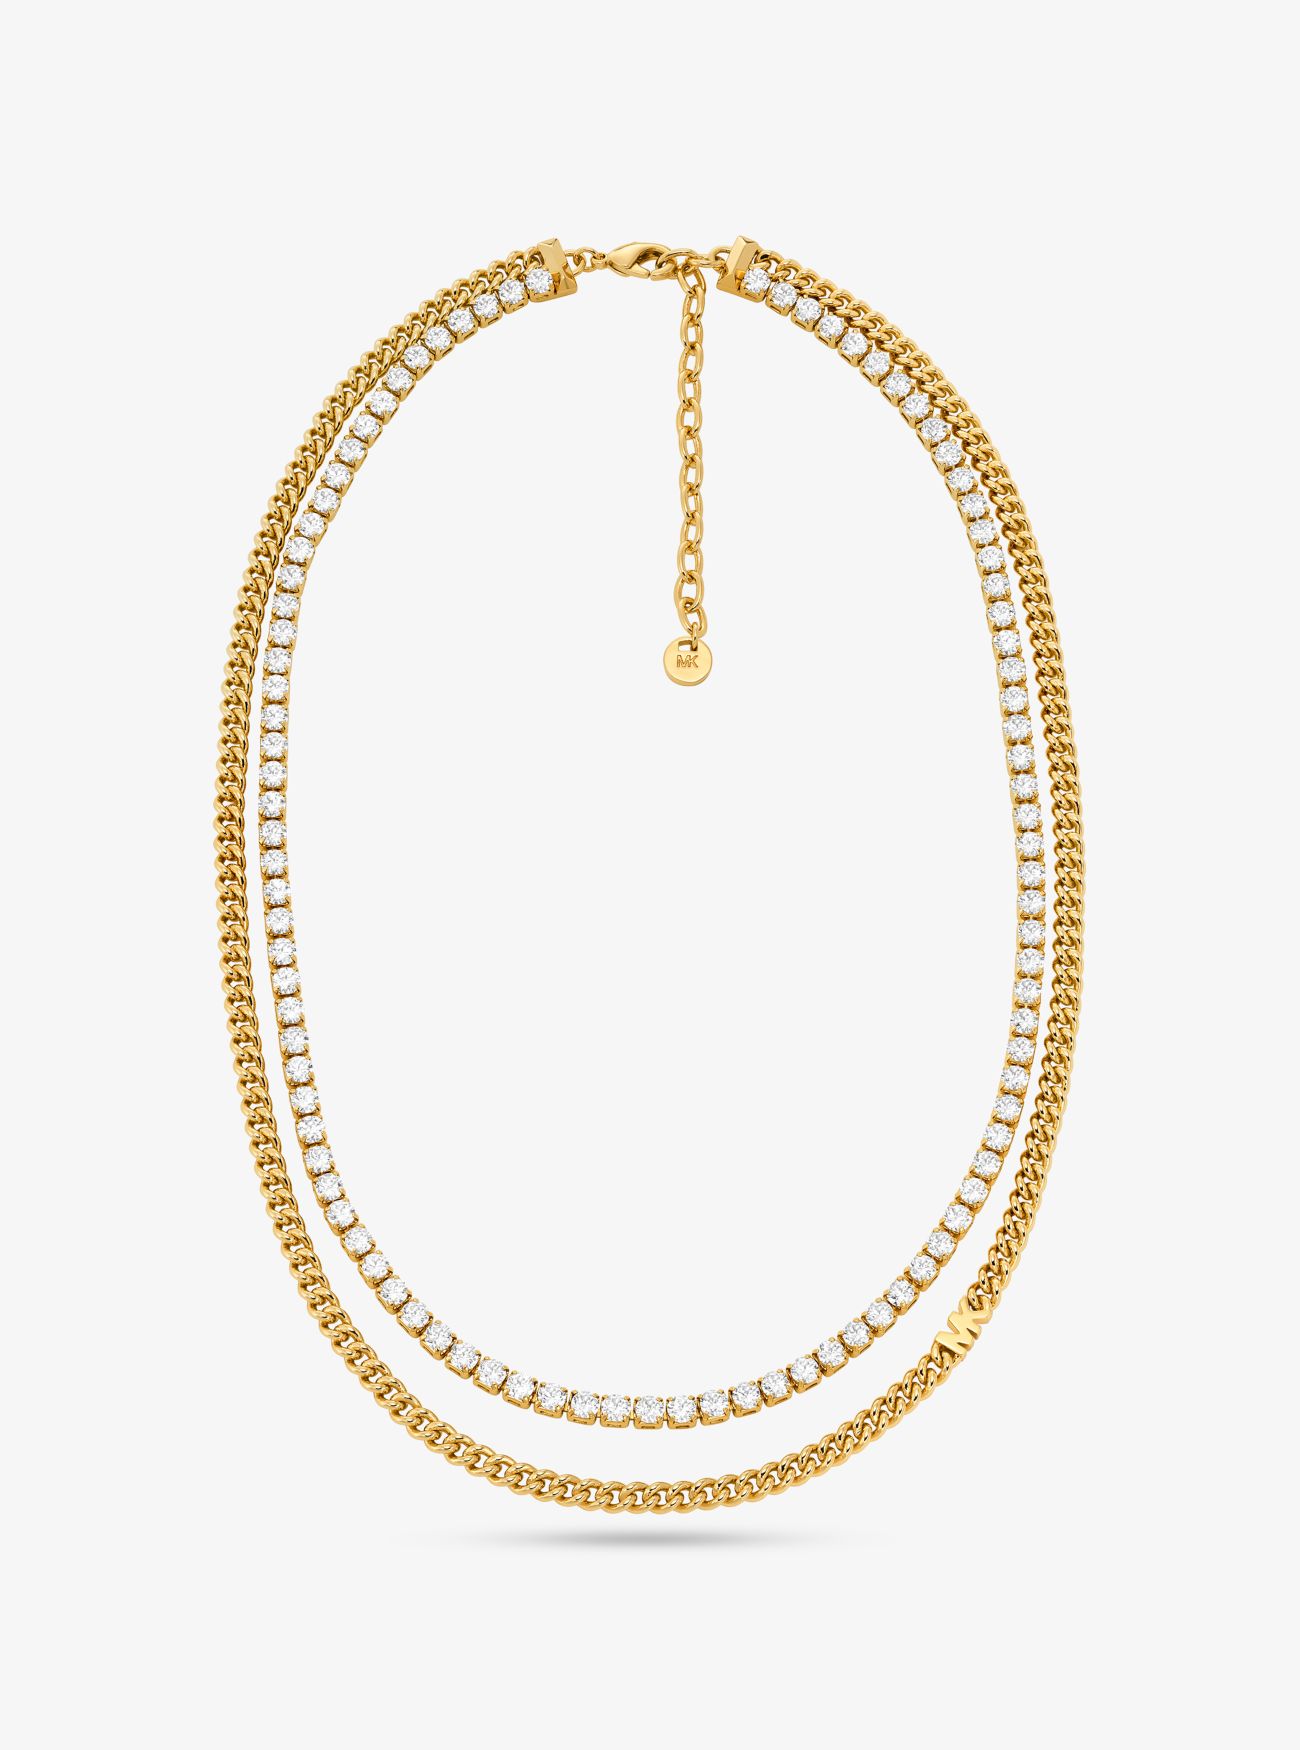 MK Precious Metal-Plated Brass Double Chain Tennis Necklace - Gold - Michael Kors